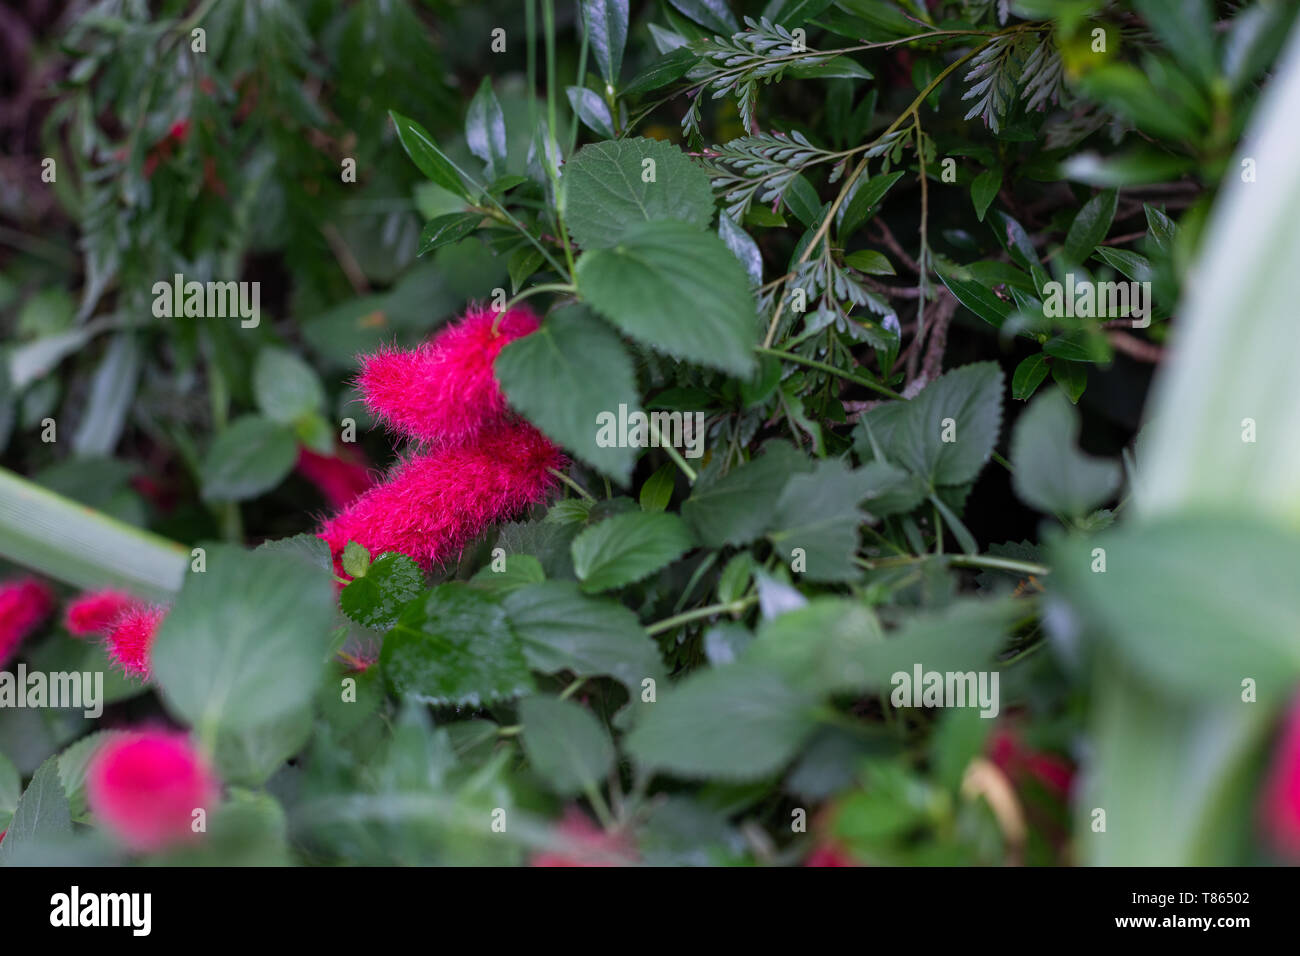 Bright pink rats tail flower surrounded by deep green foliage in a garden background Stock Photo